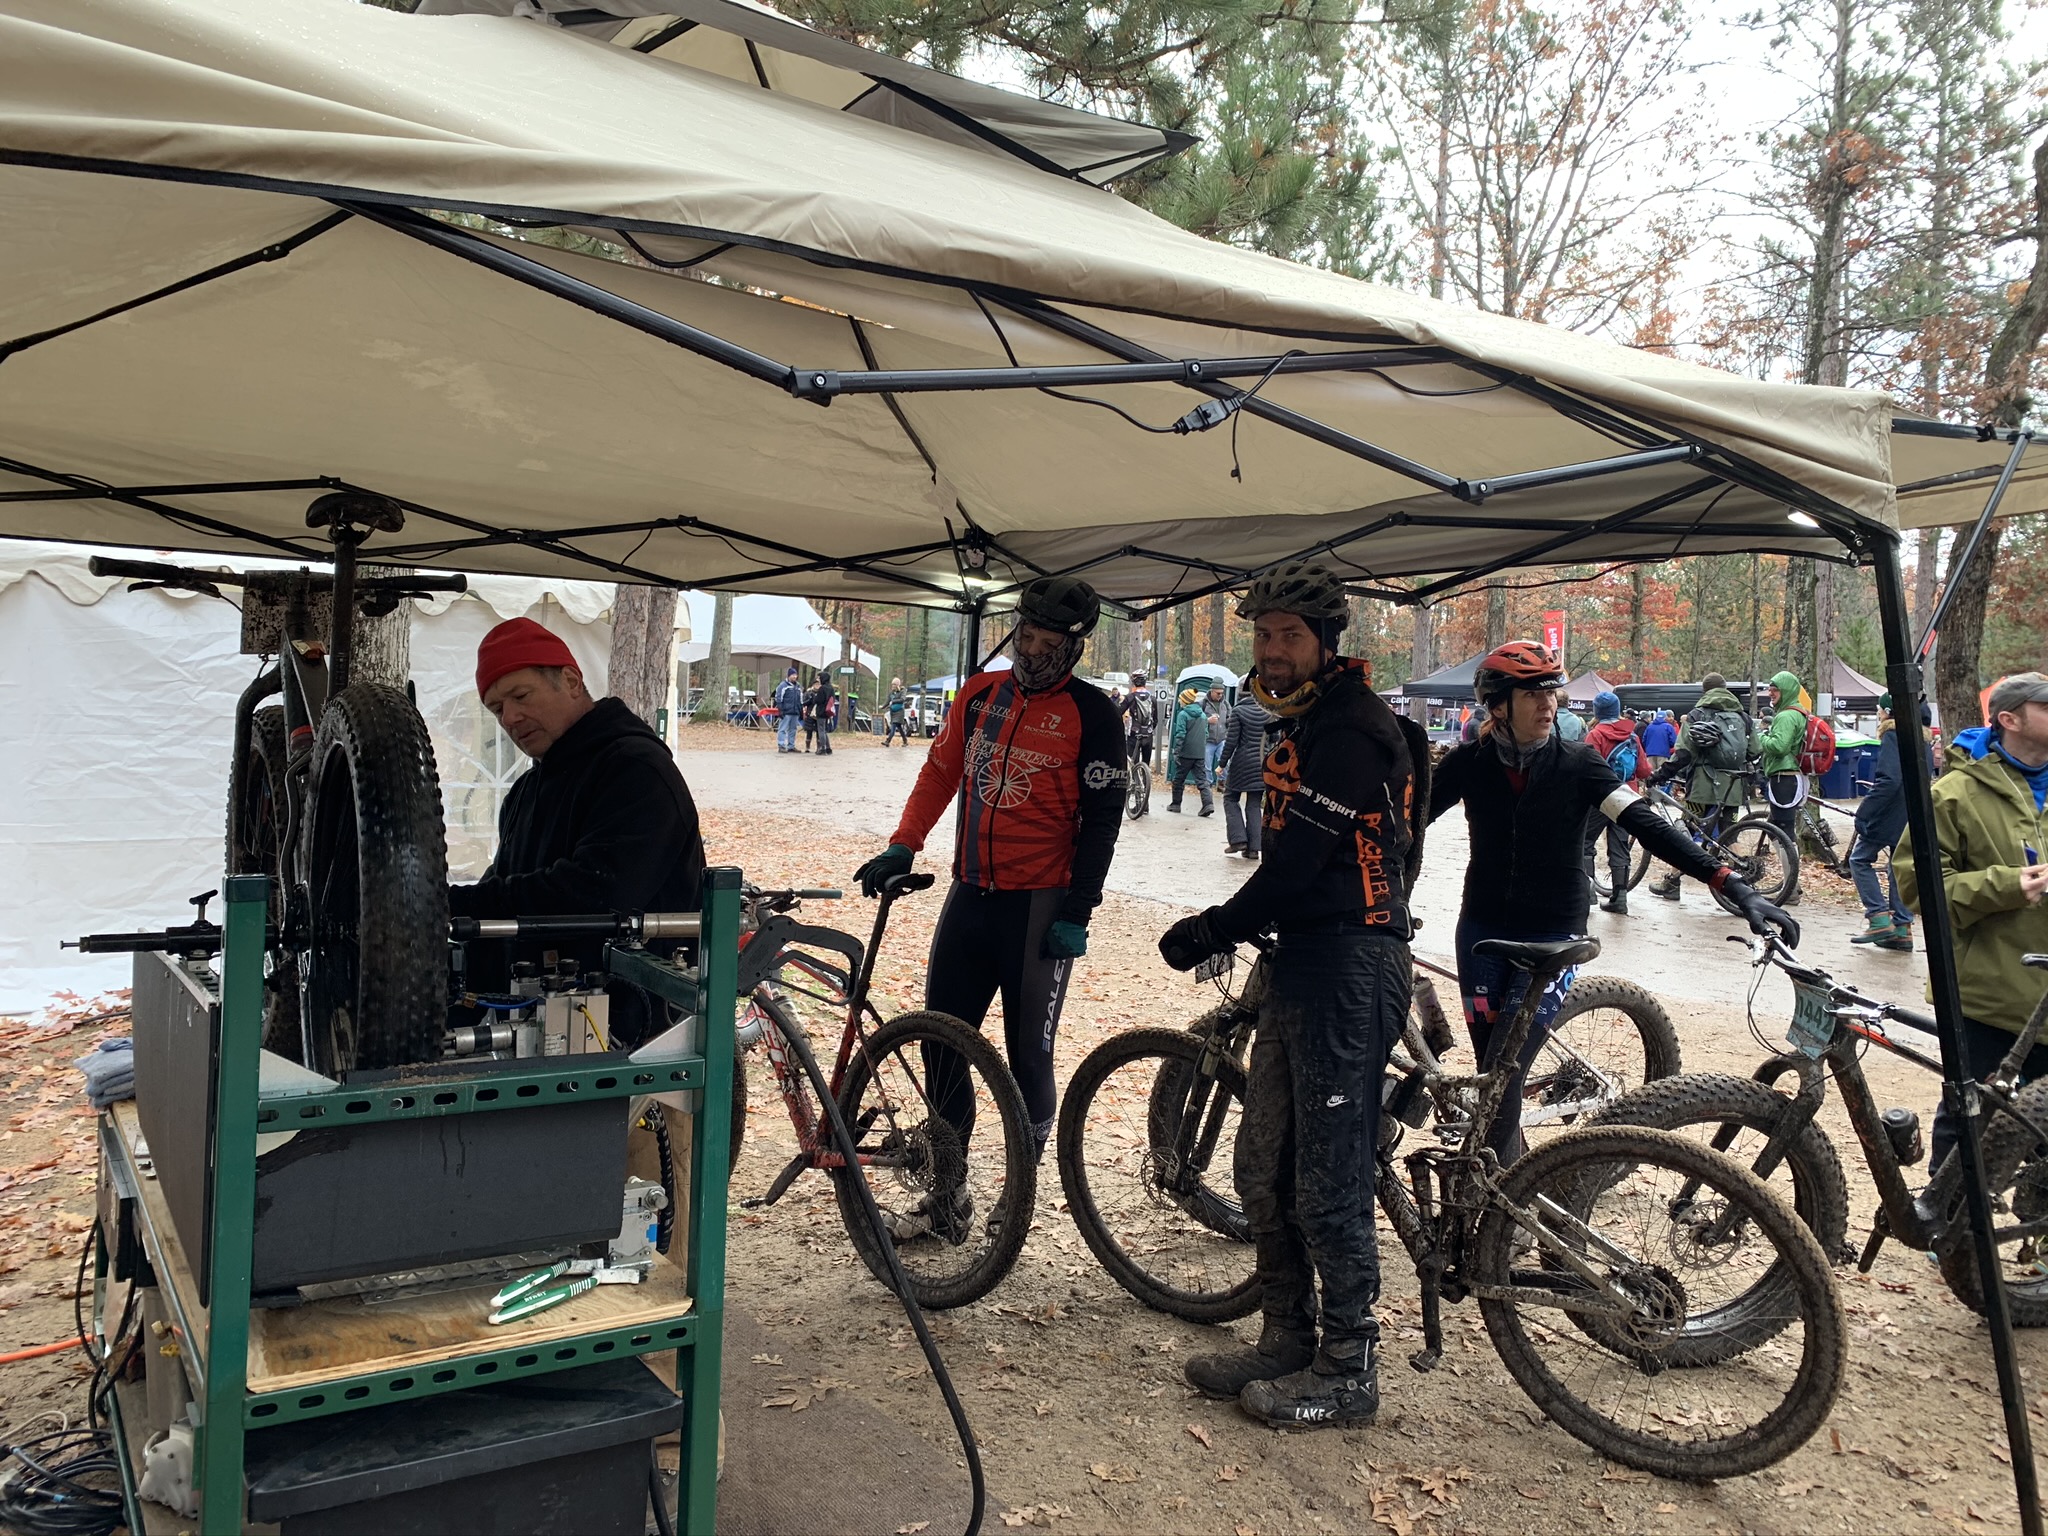 Four bicyclists wait in line to have their bicycles cleaned and lubricated by the VonBuckinator™